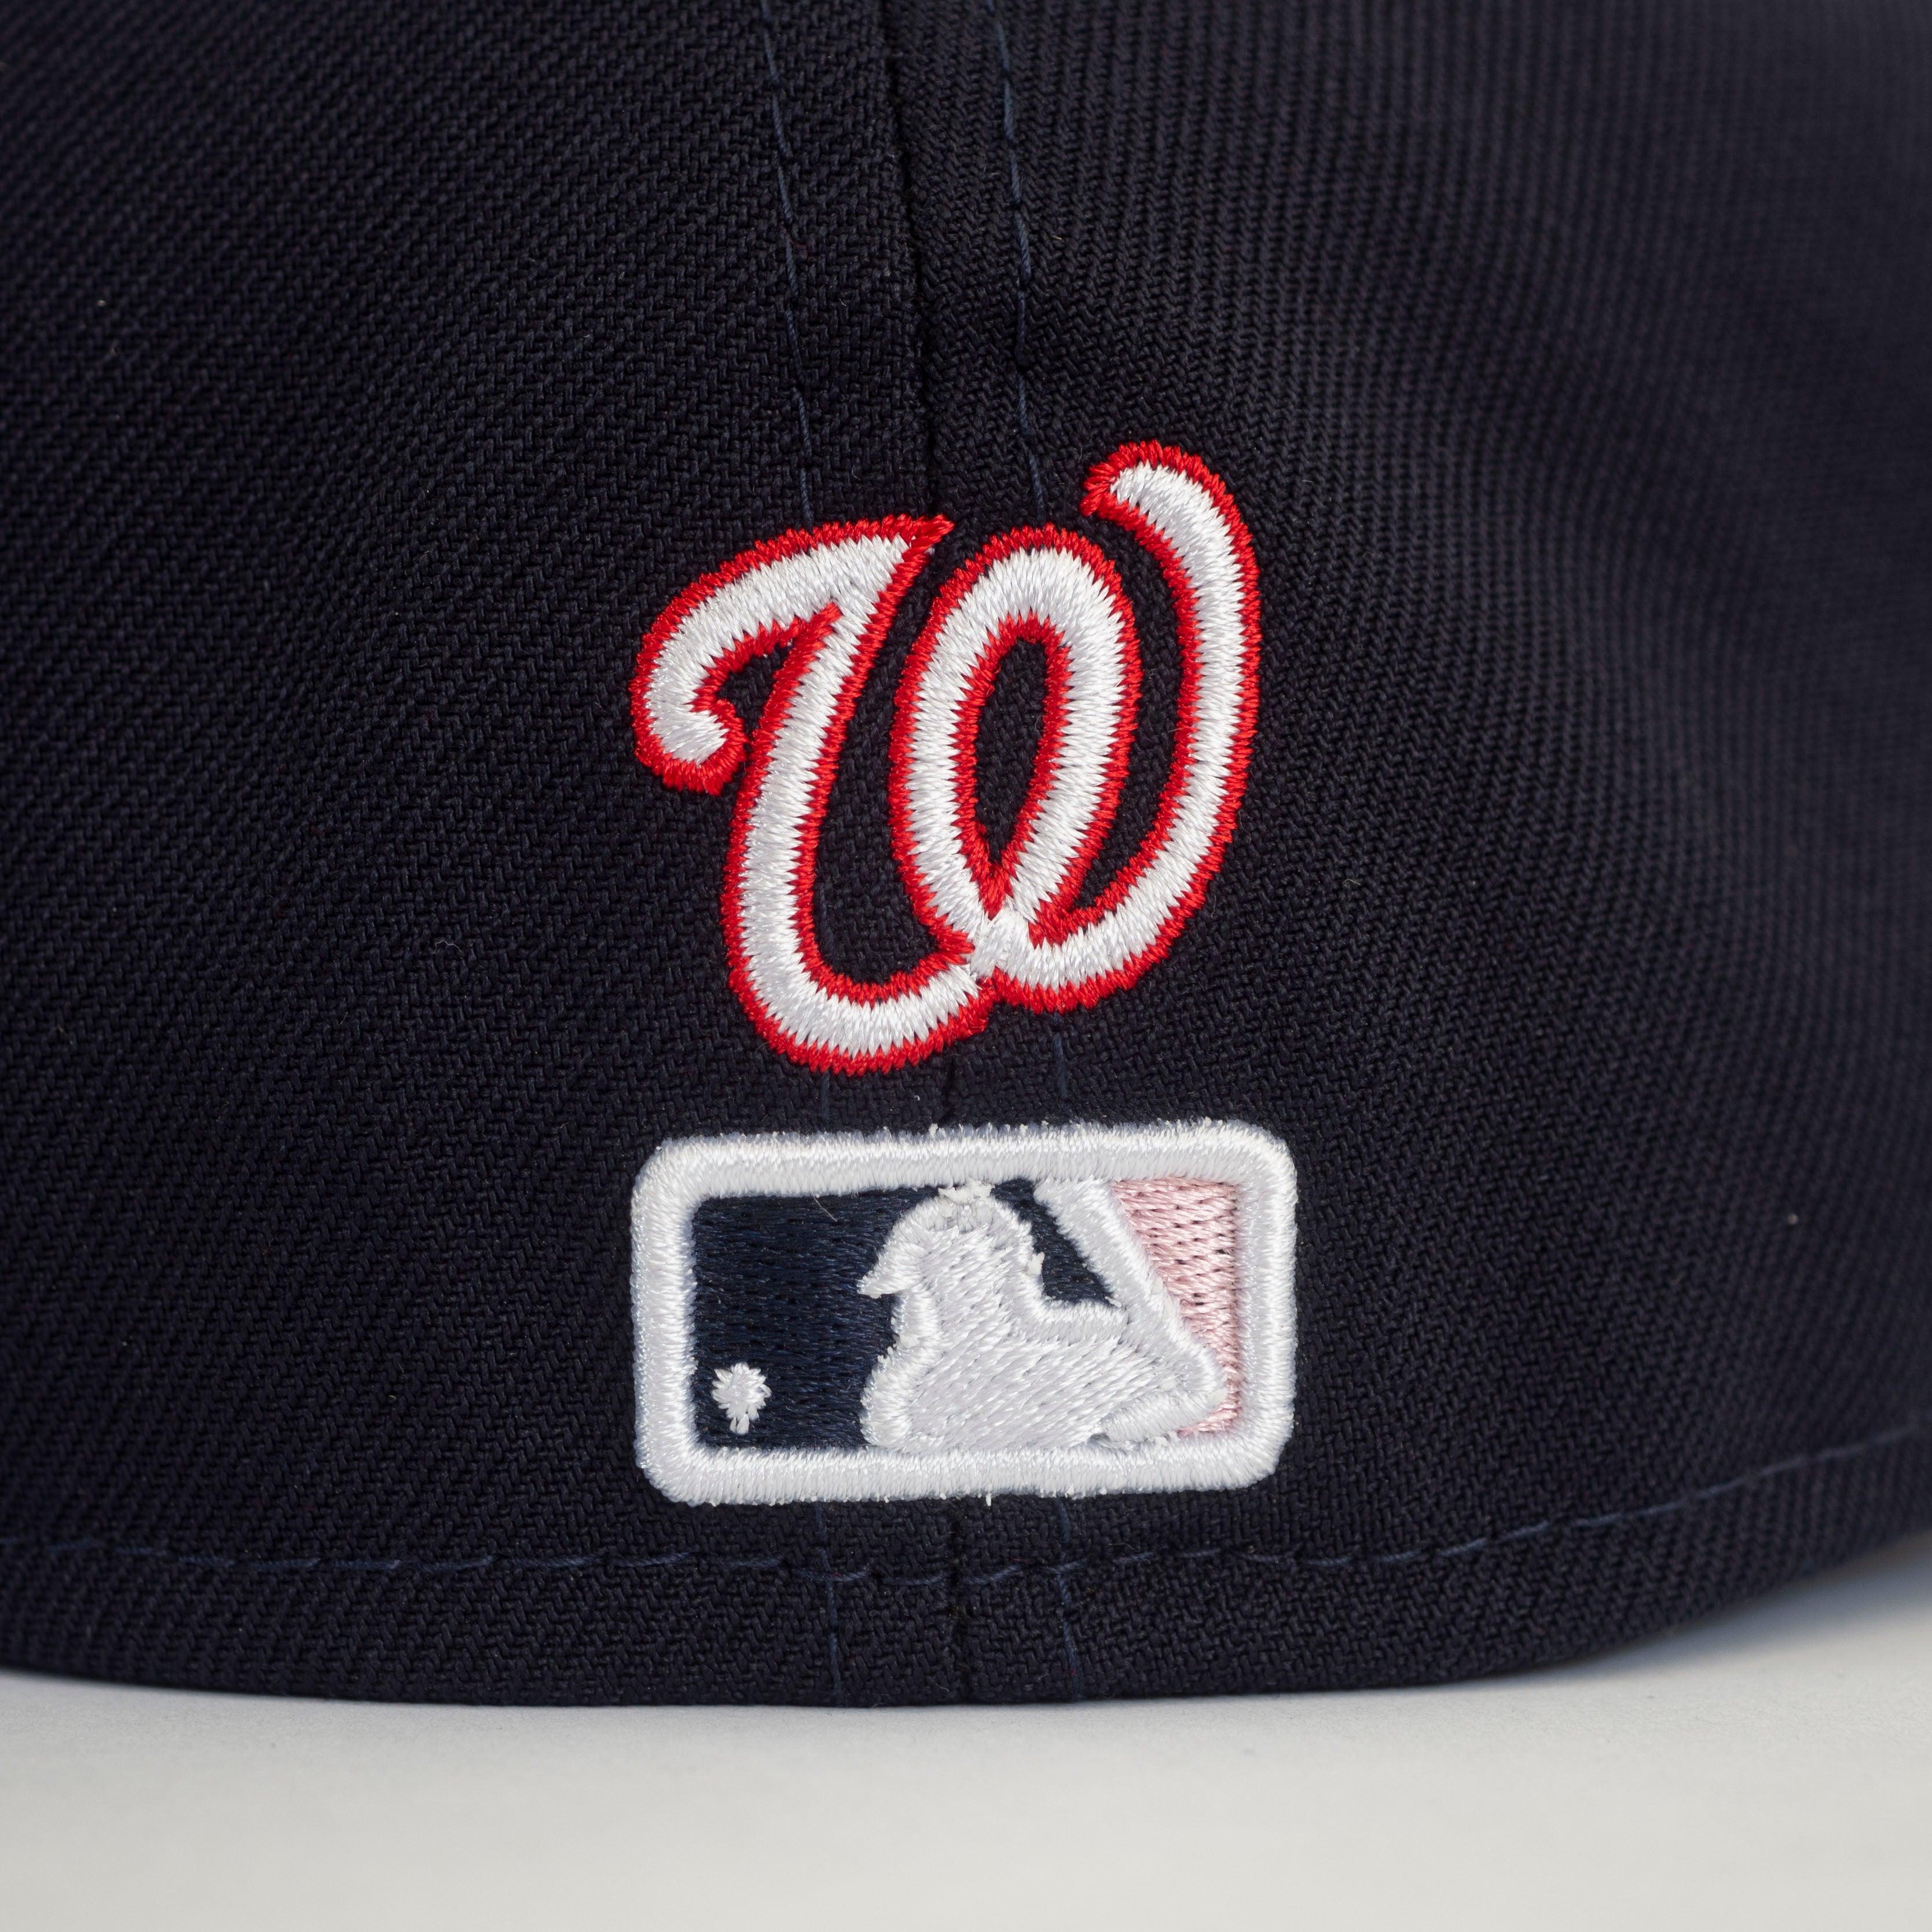 NEW ERA 59FIFTY MLB WASHINGTON NATIONALS SIDE PATCH BLOOM NAVY / PINK UV FITTED CAP - FAM